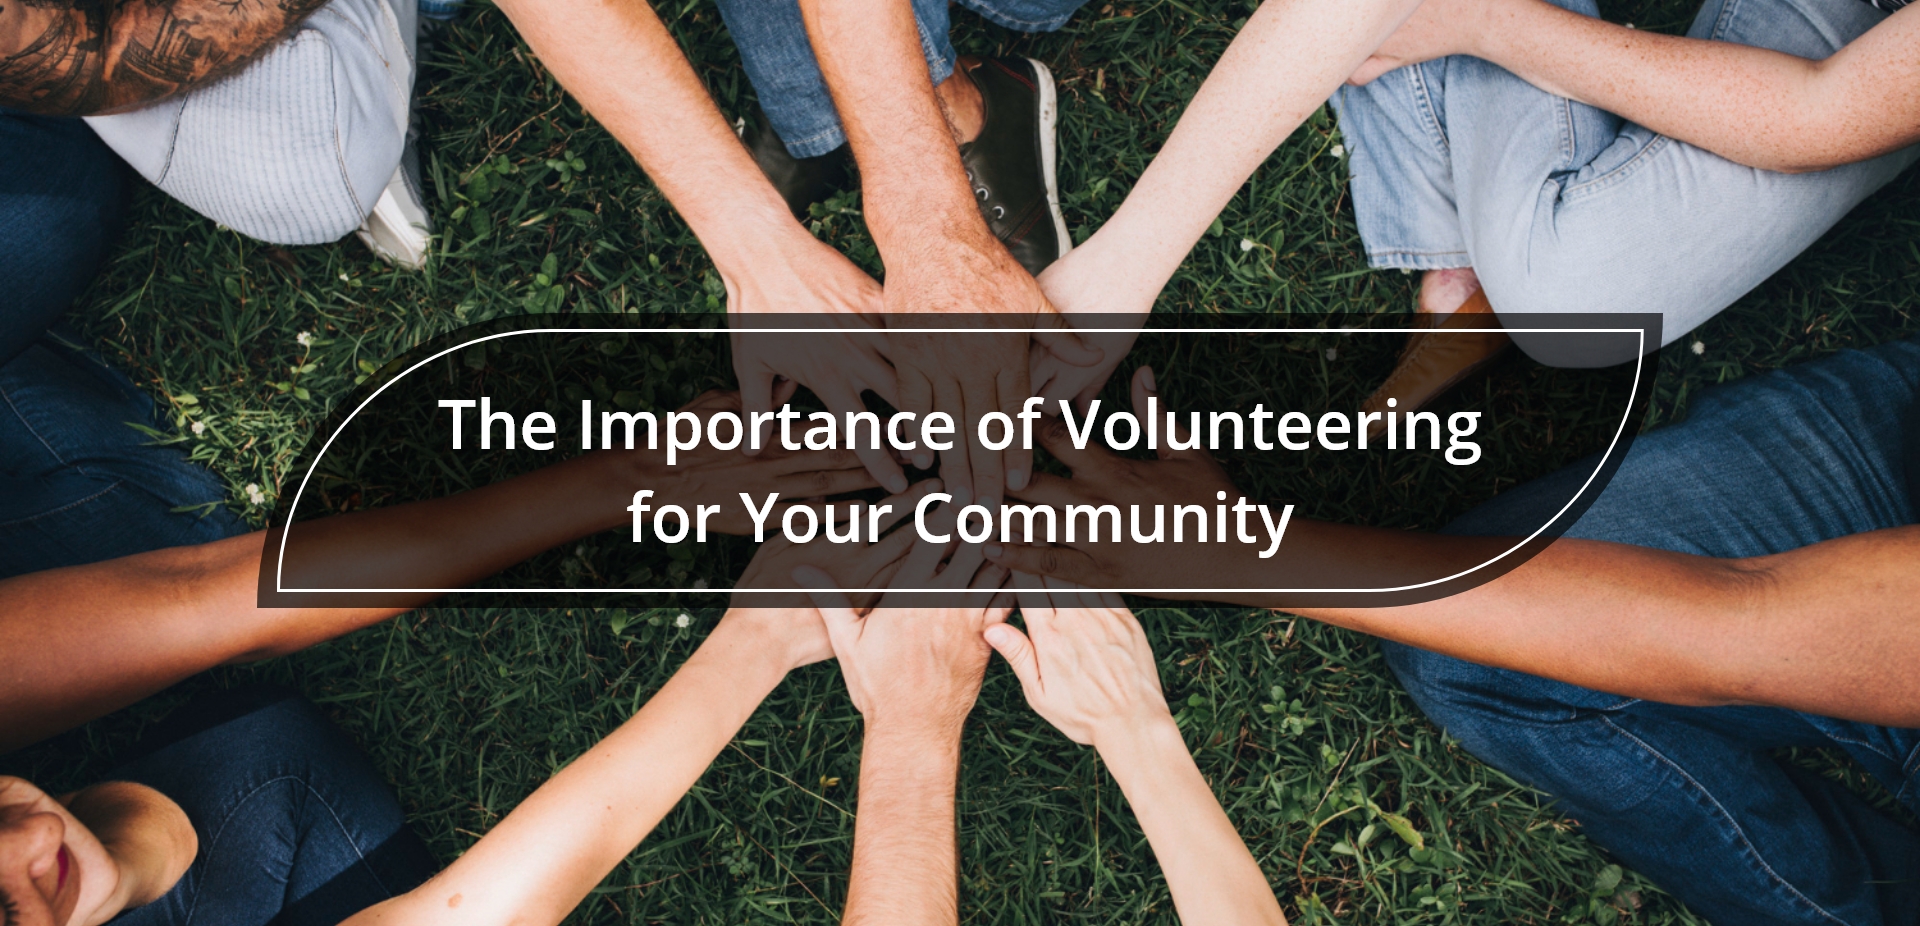 The Importance of Volunteering for Your Community